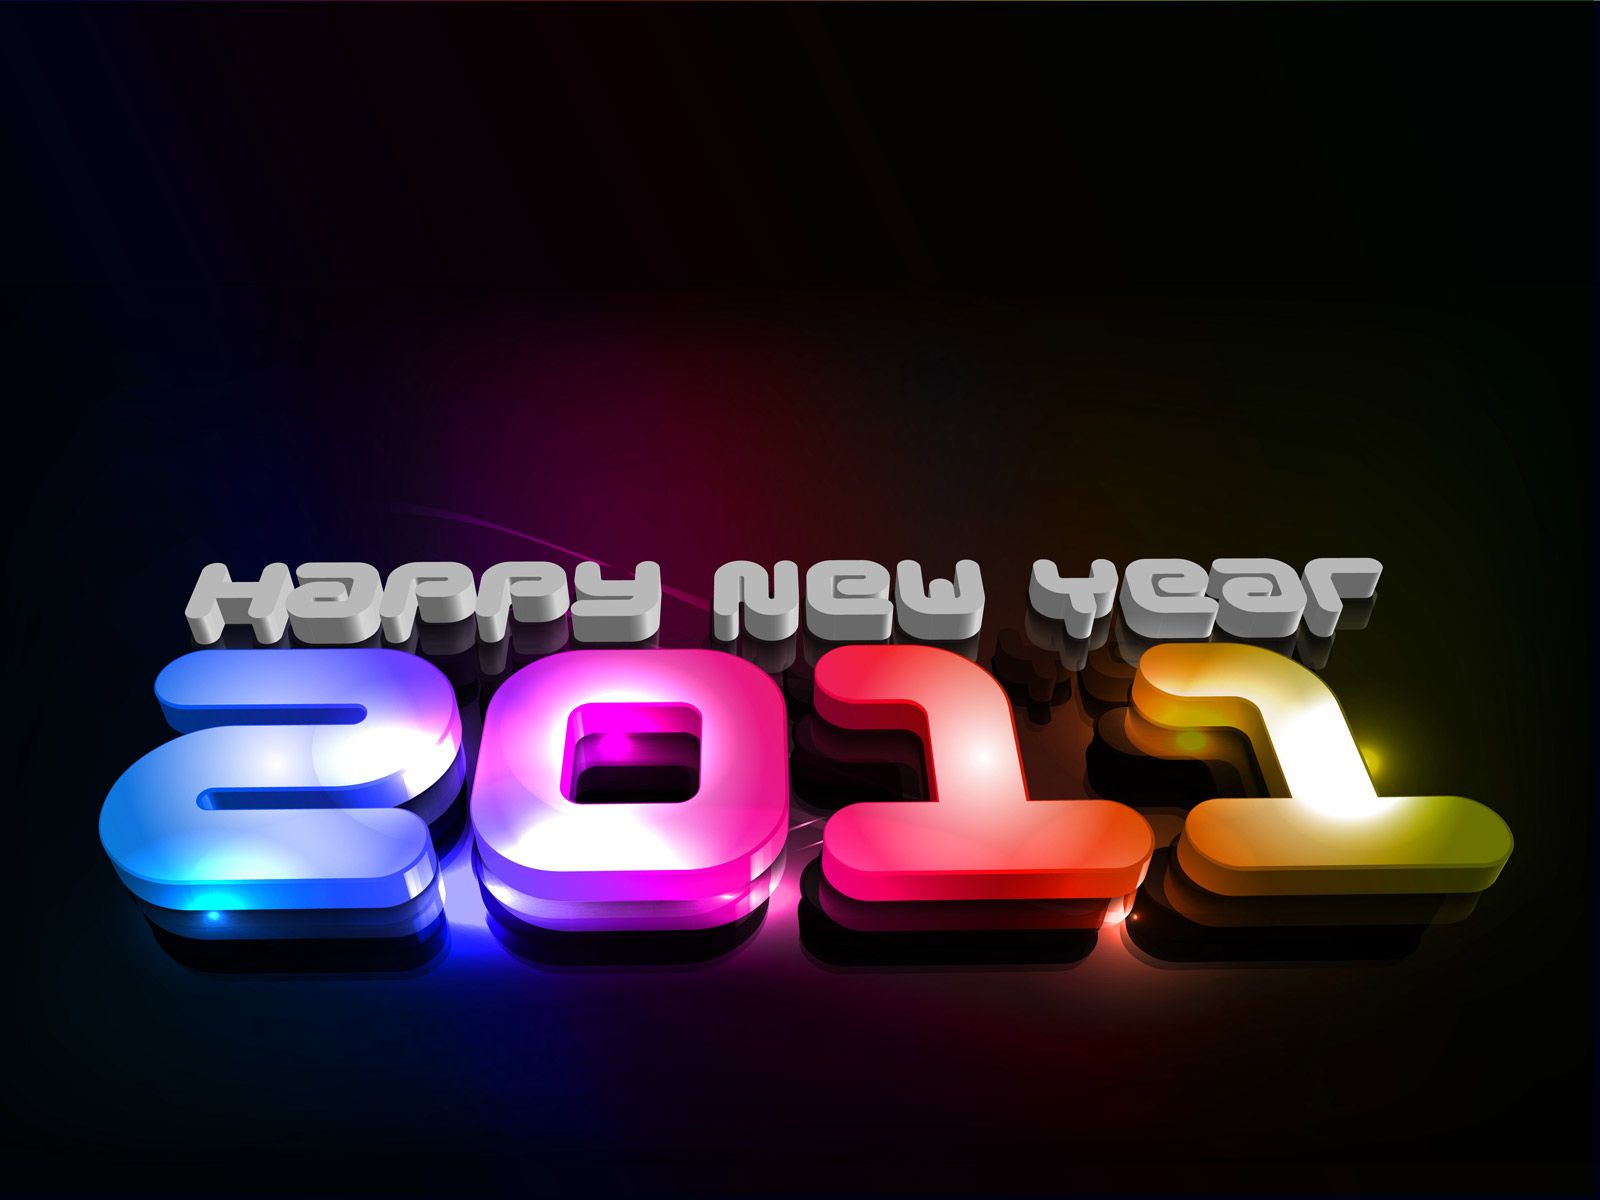 Happy New Year - Fun Wallpaper - Christian Wallpapers and Backgrounds